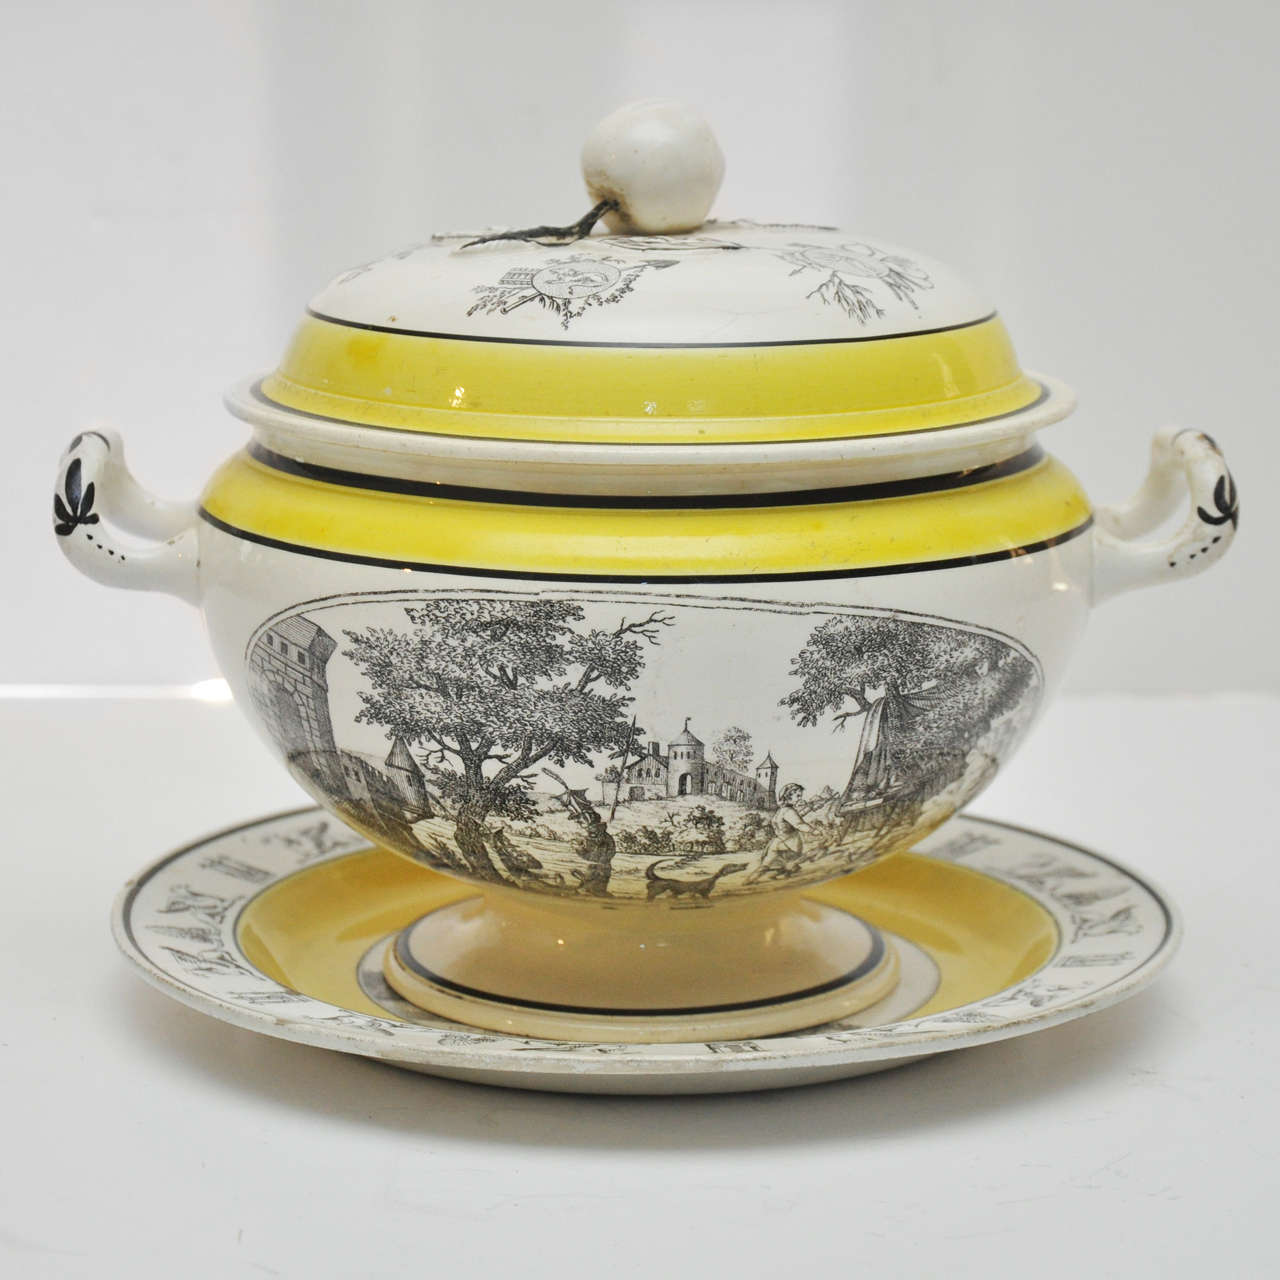 French Yellow and White Banded Creil Tureen, with lid and associated under plate, Circa 1820